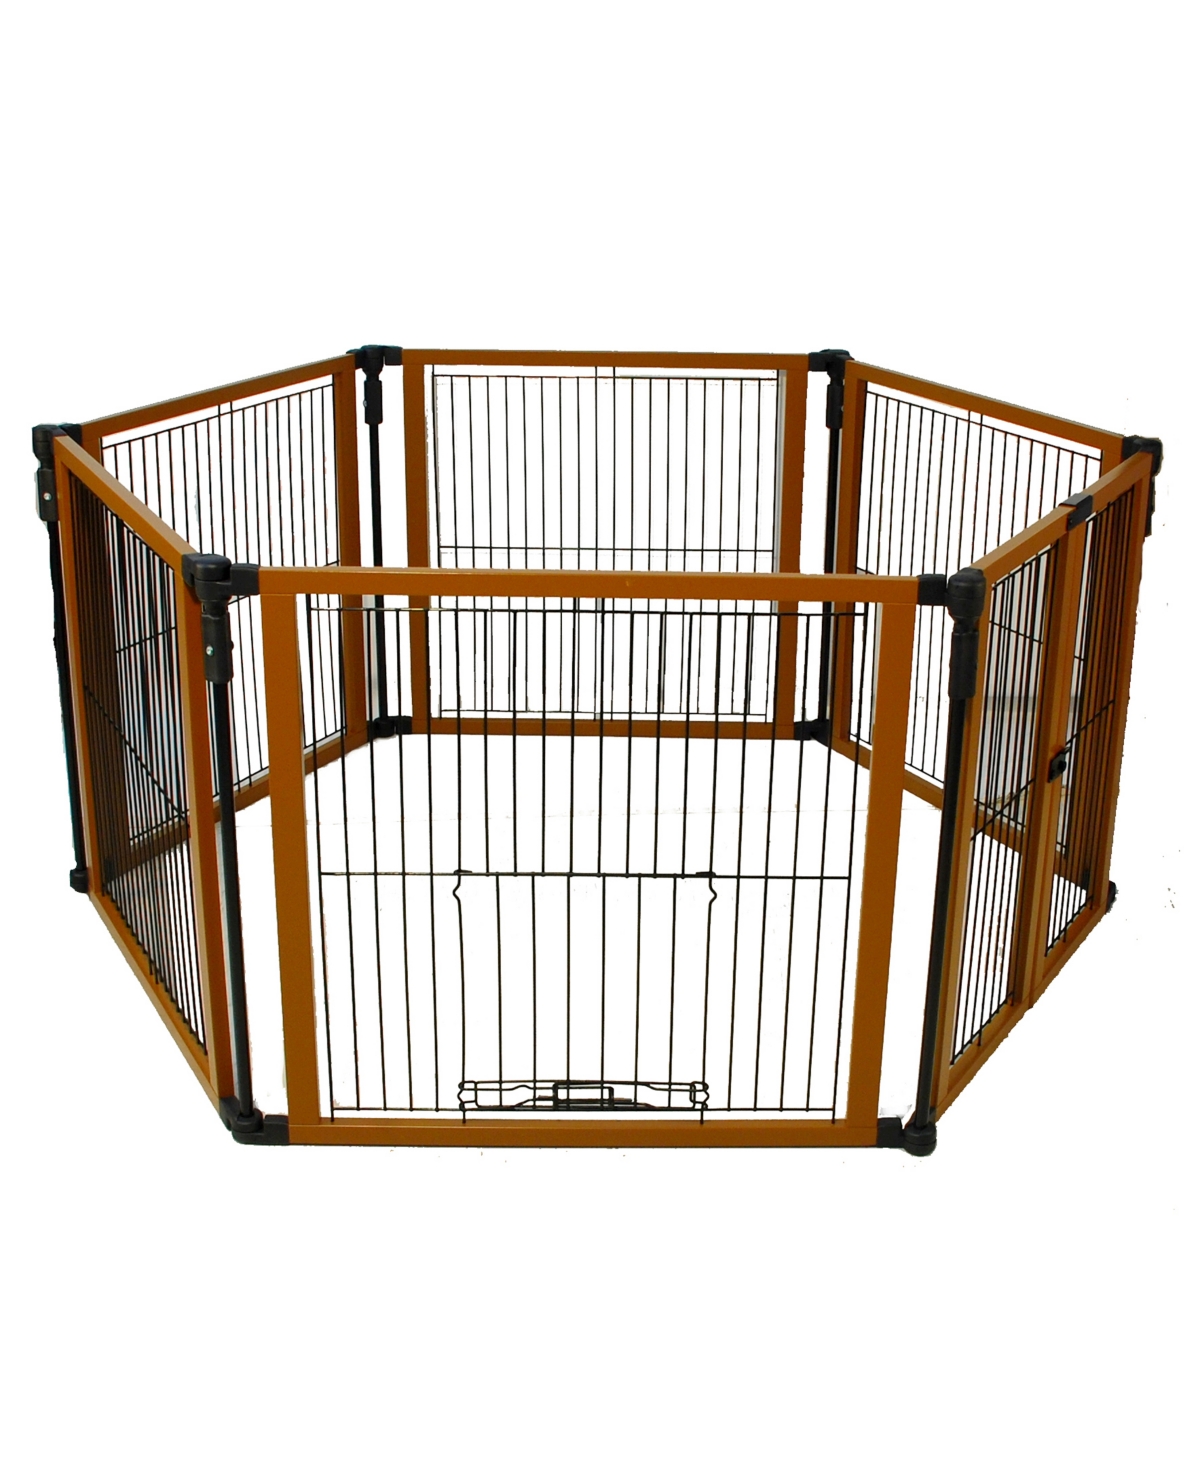 UPC 635035809009 product image for Convertible Pet Pen and Gate | upcitemdb.com